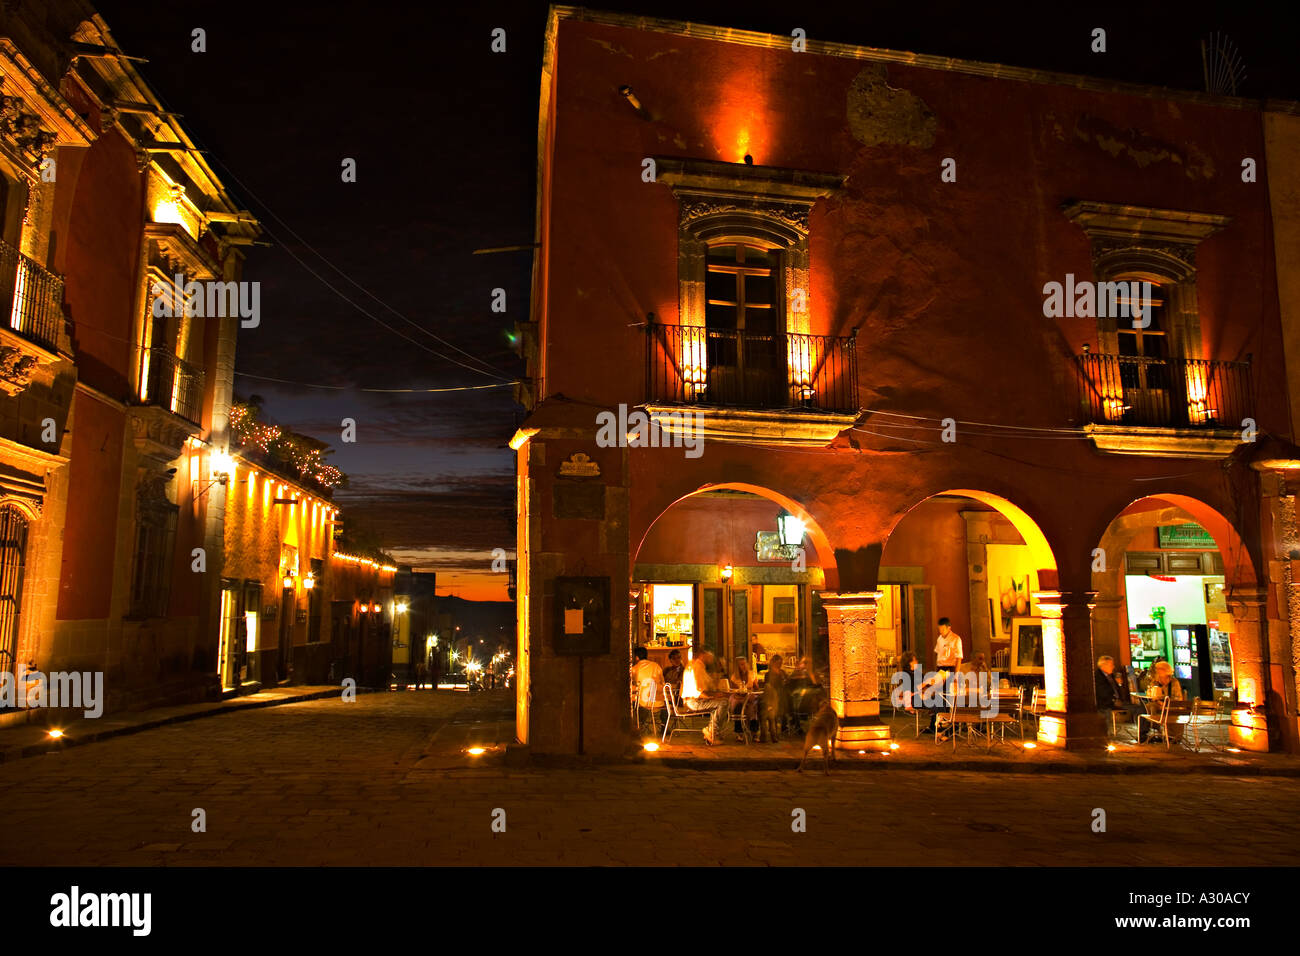 MEXICO San Miguel de Allende People dine outdoors in arched walkway plaza near el jardin cobblestone street at night Stock Photo